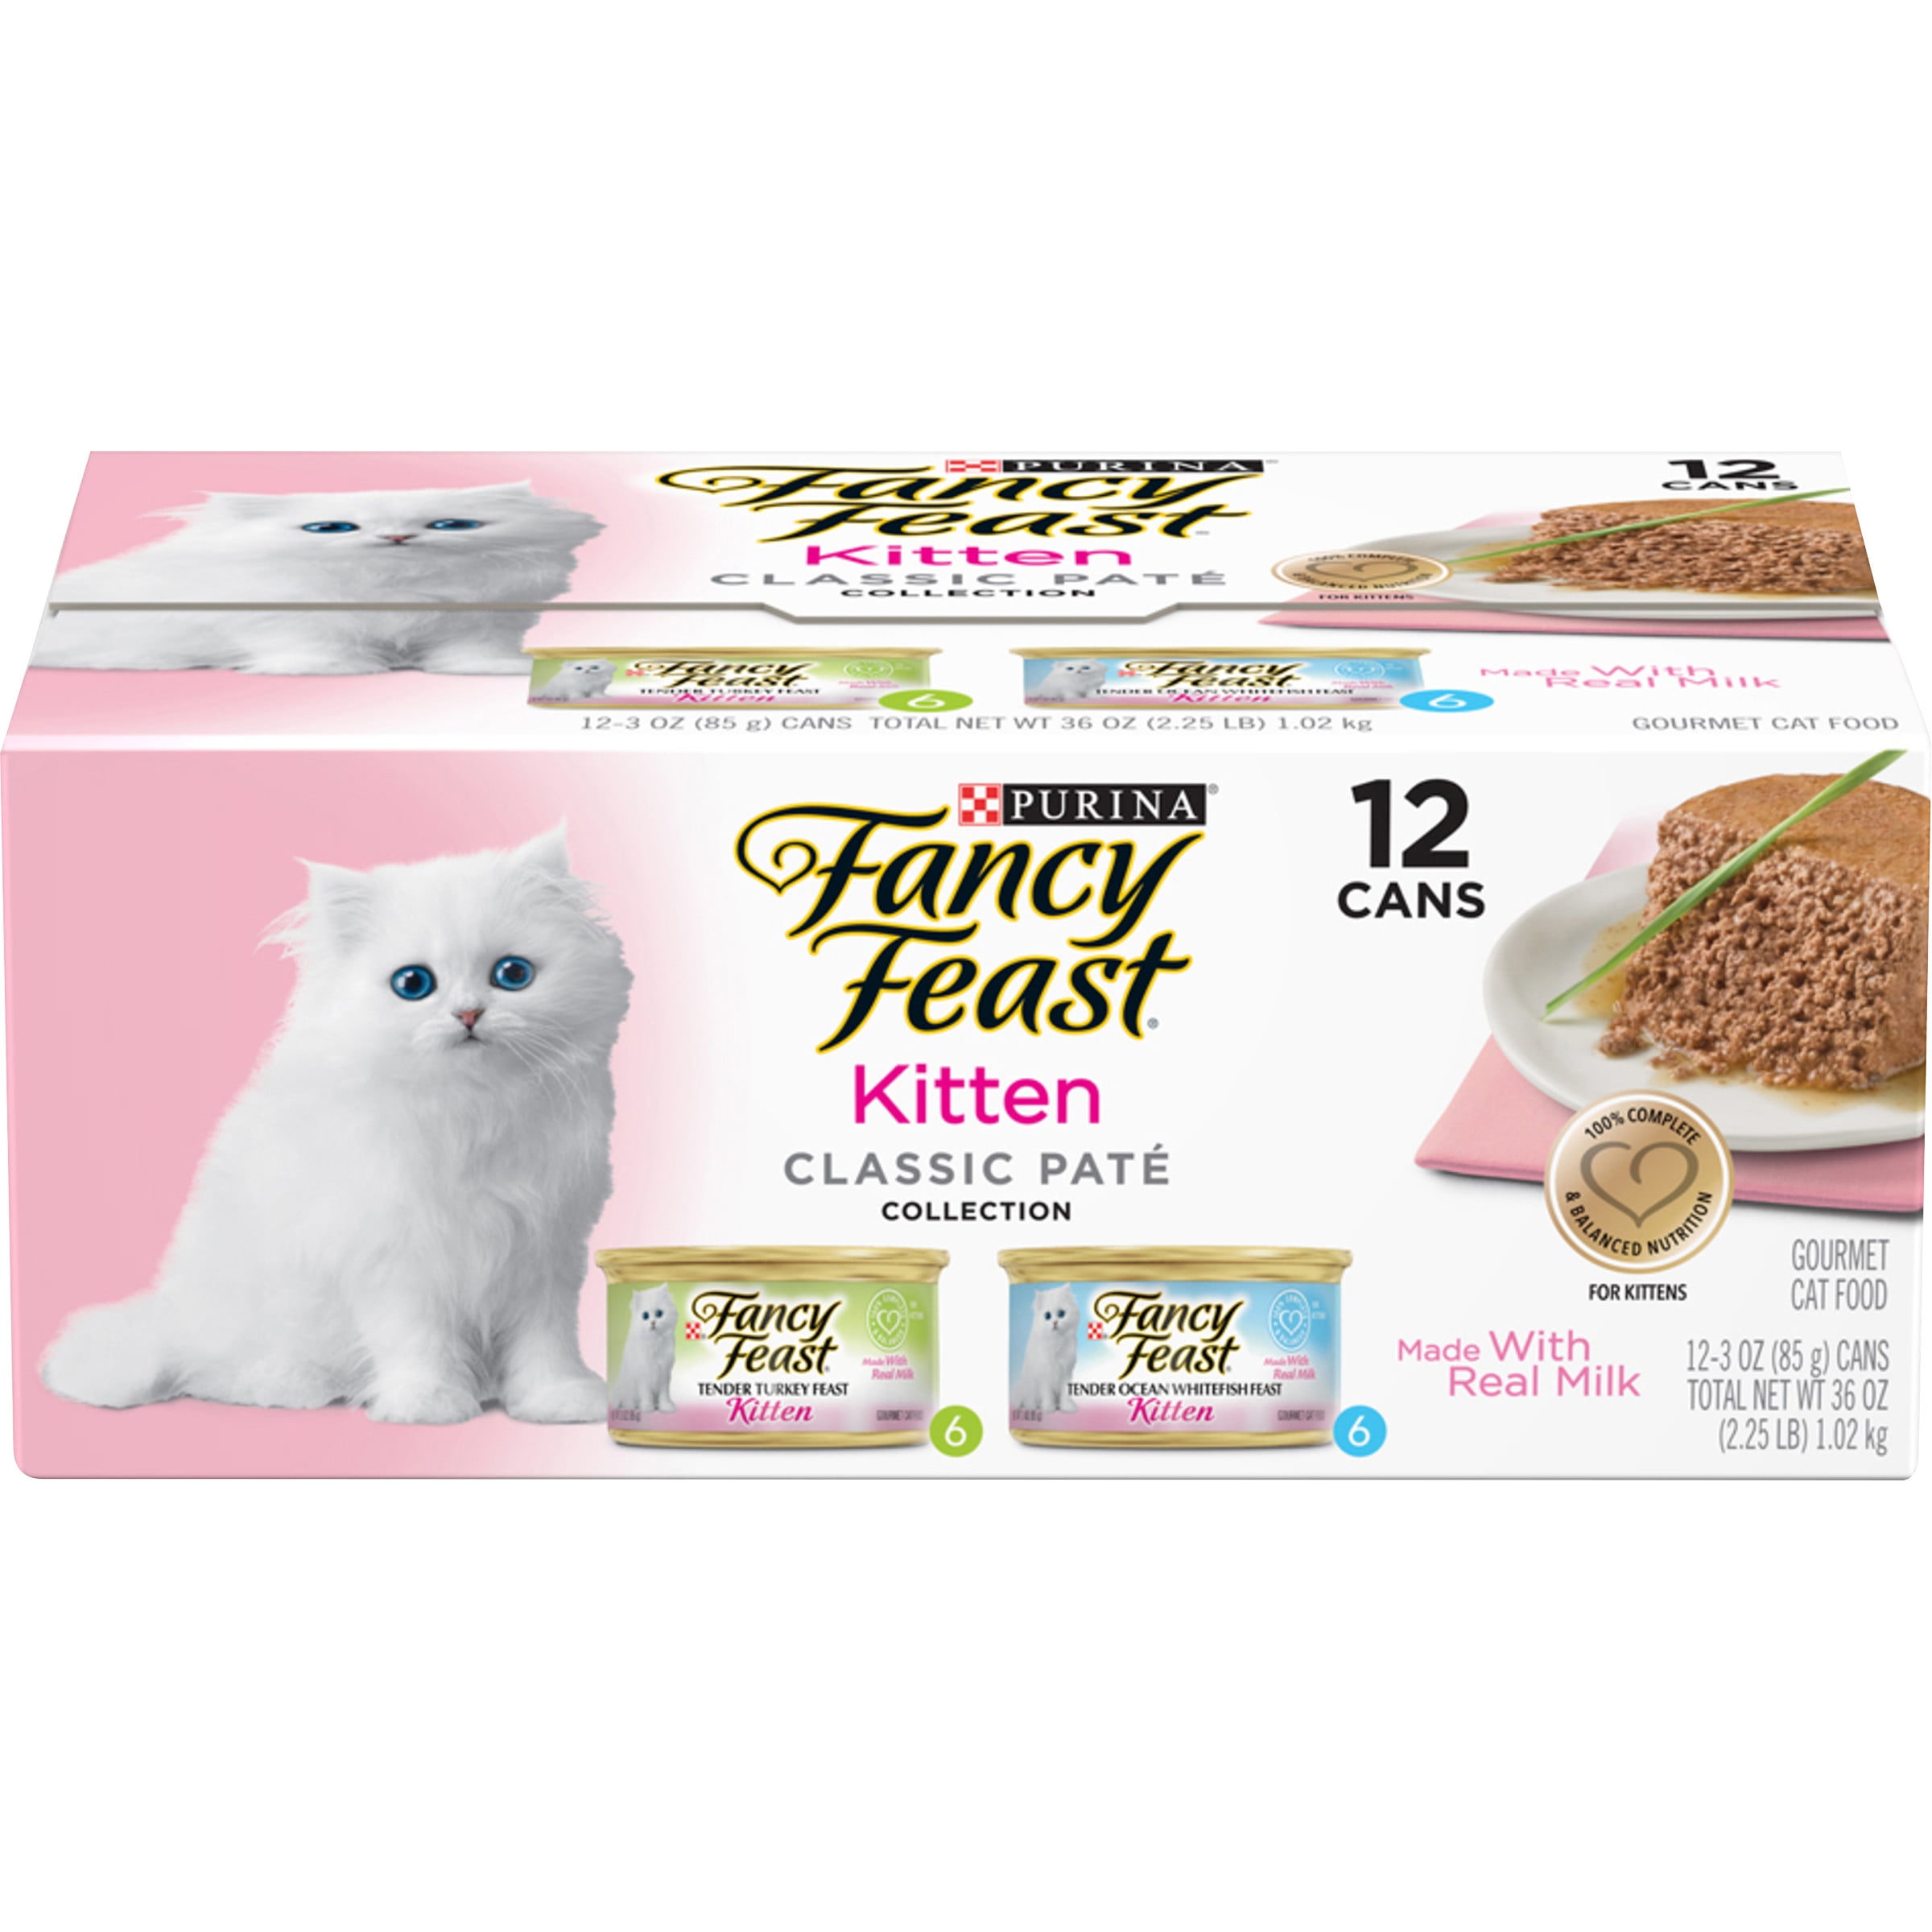 Purina Fancy Feast Classic Pate Wet Cat Food for Kittens Variety Pack, 3 oz Cans (12 Pack)